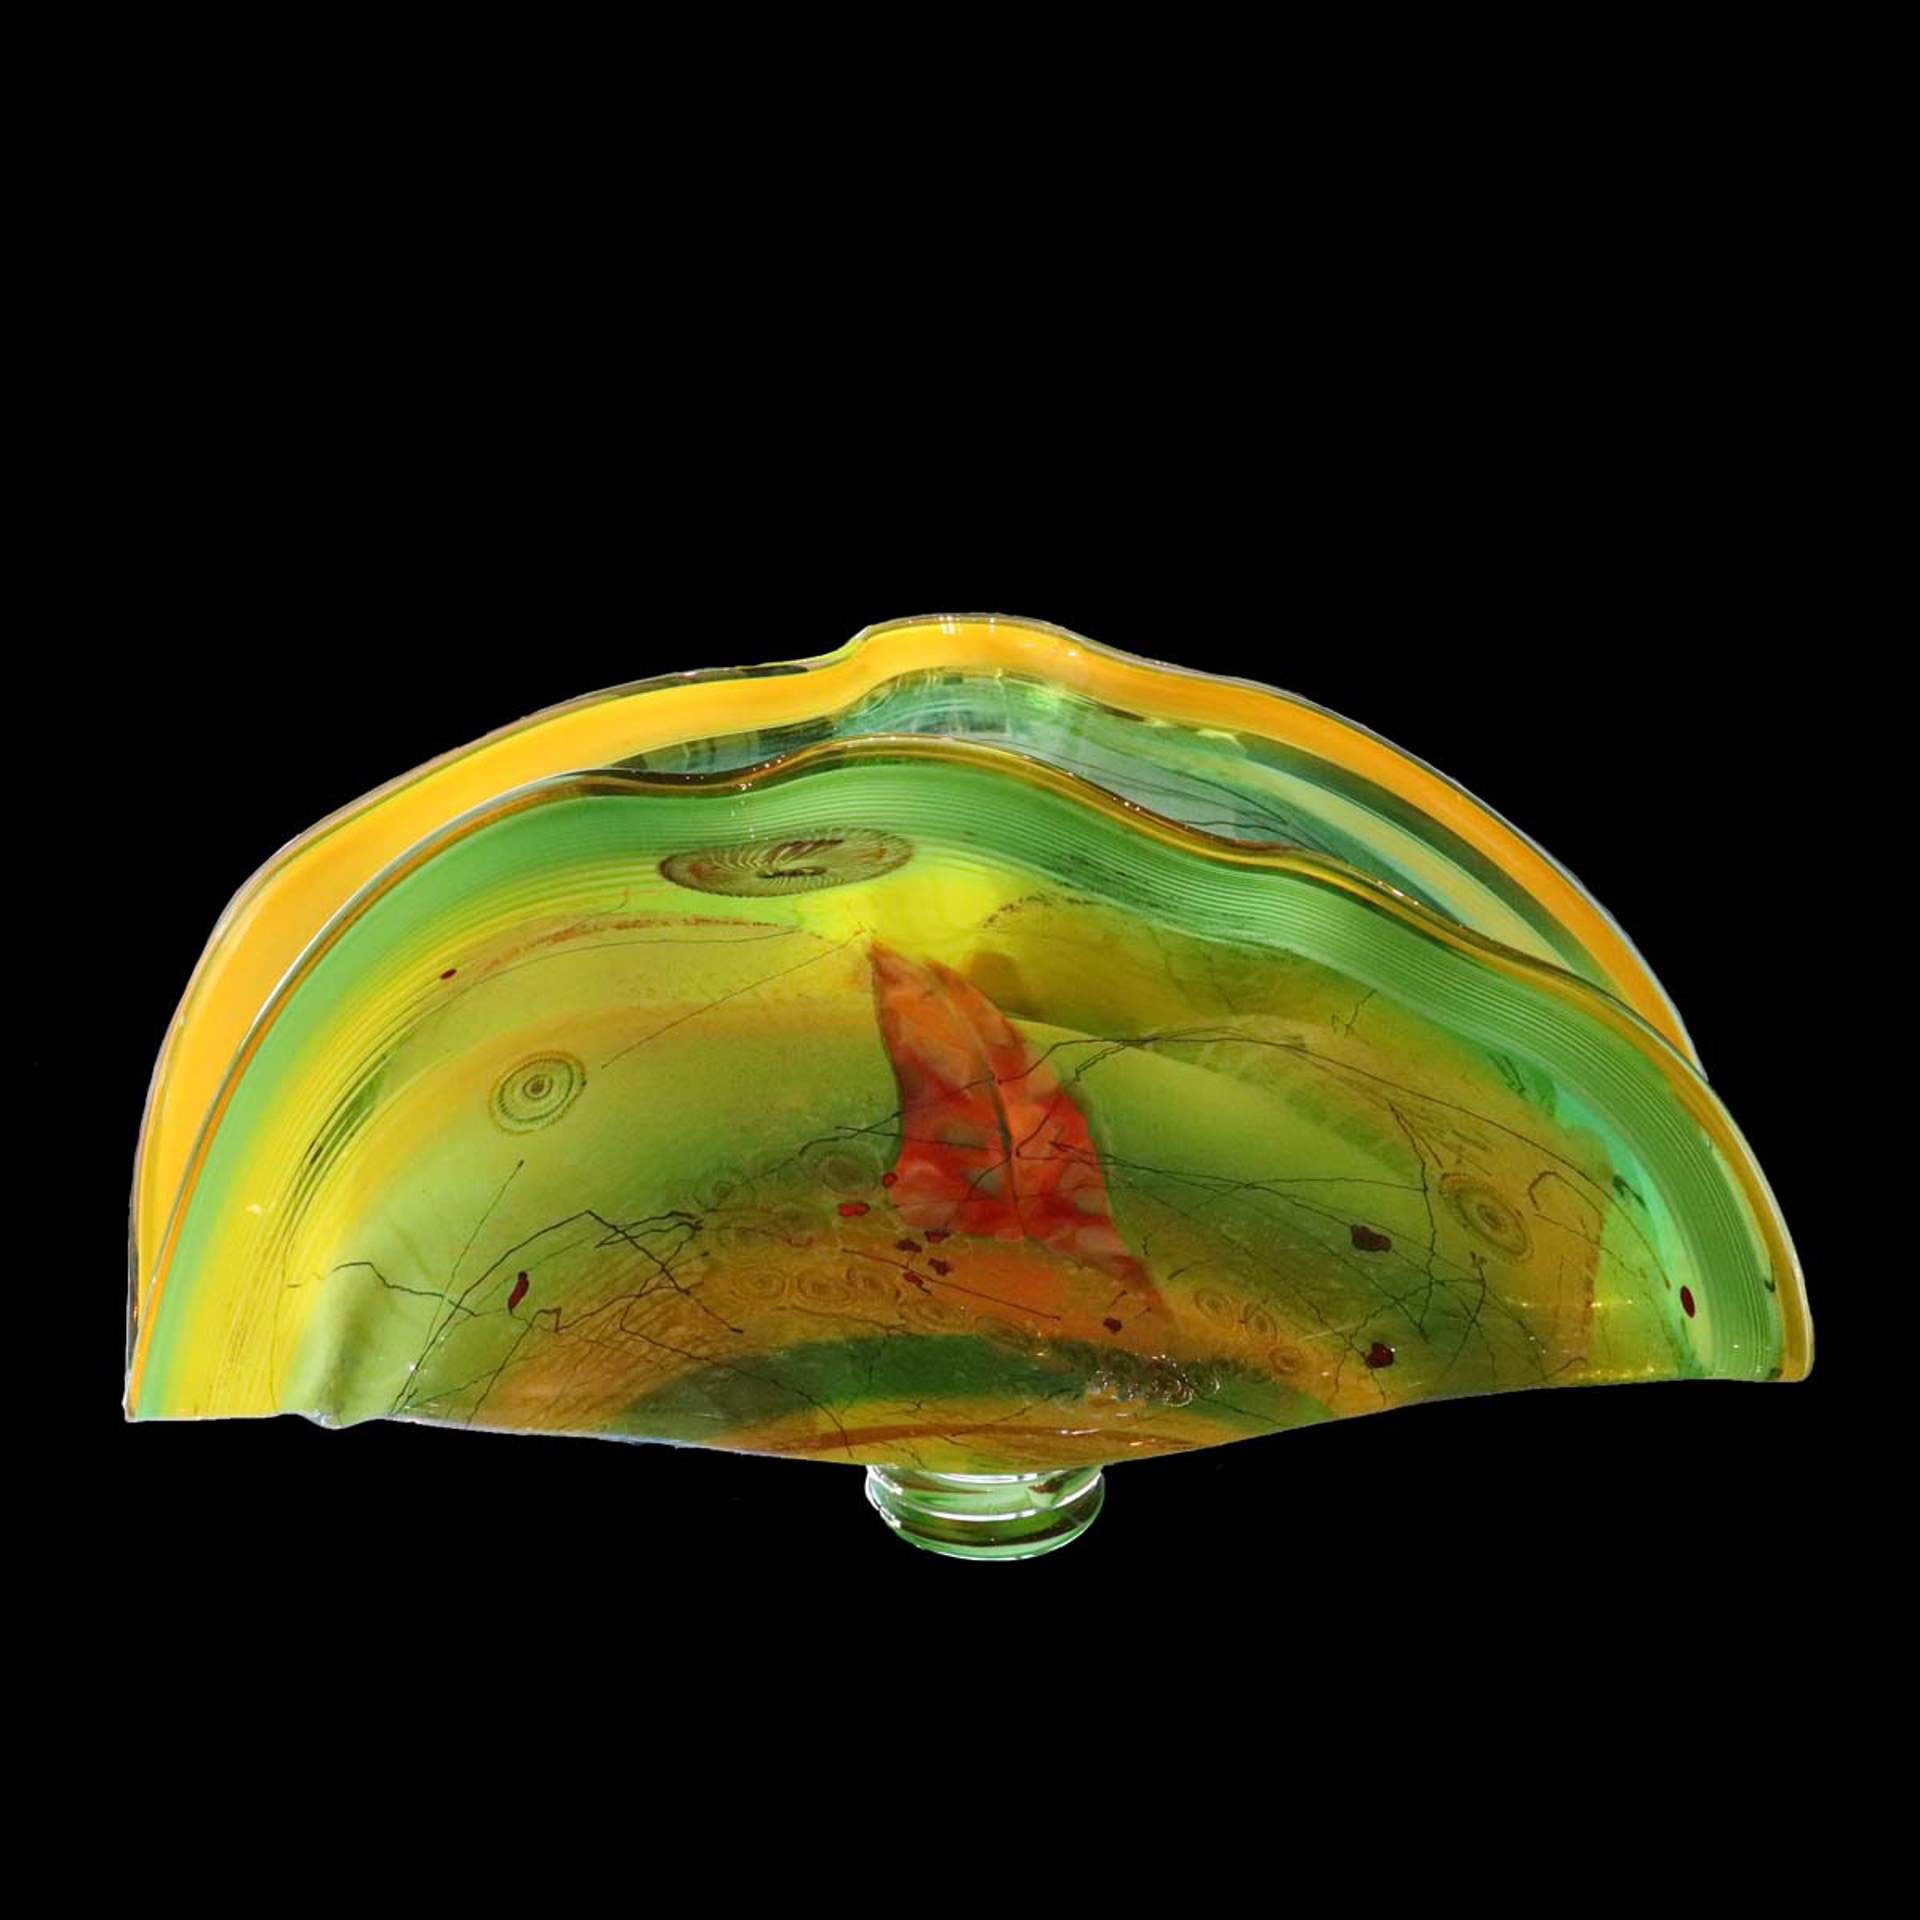 Clam Series Blown Glass - Green and Yellow with yellow interior rim by Christopher Hawthorne